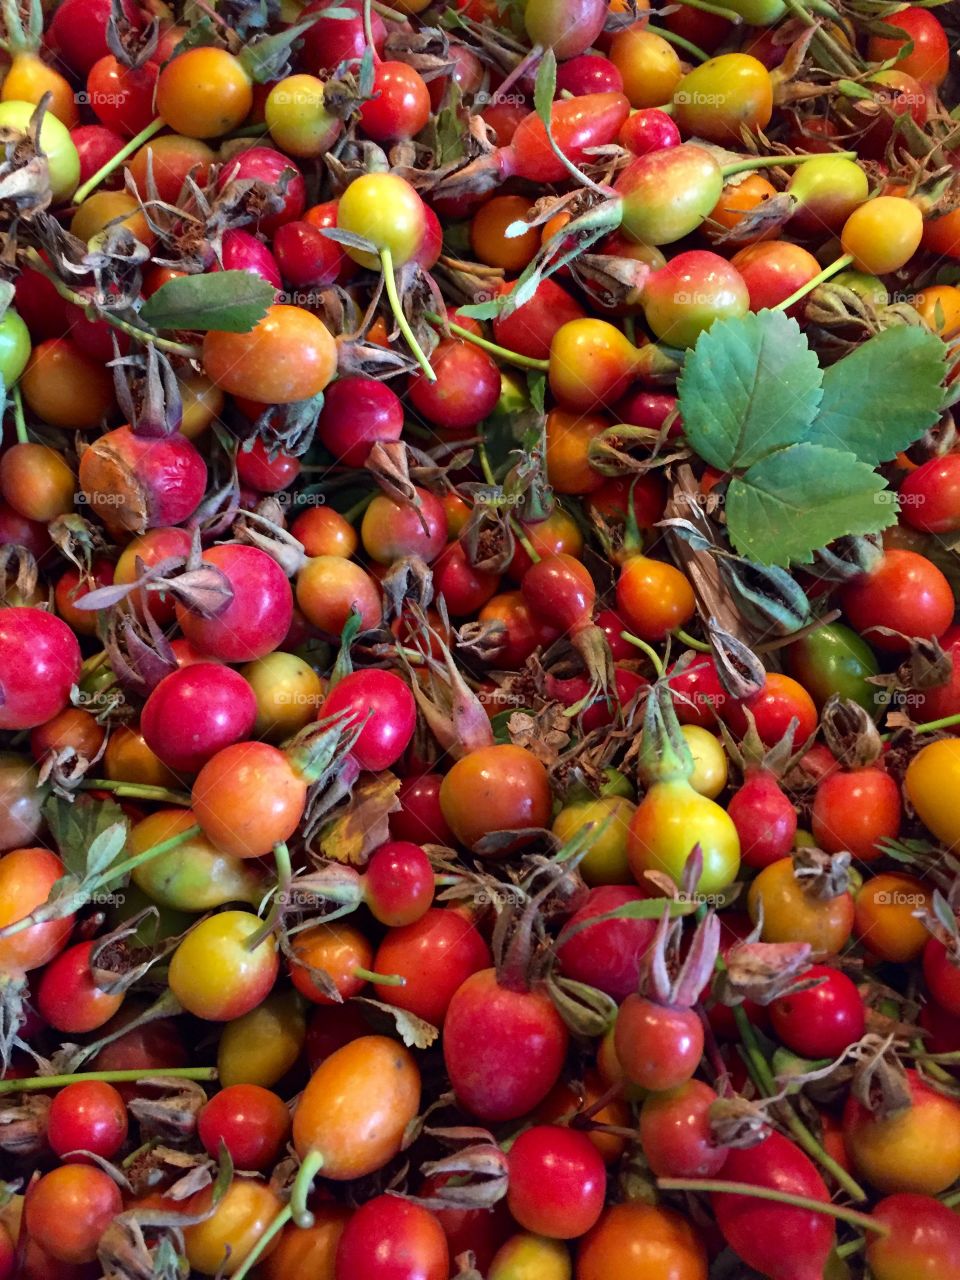 A day of foraging rose hips